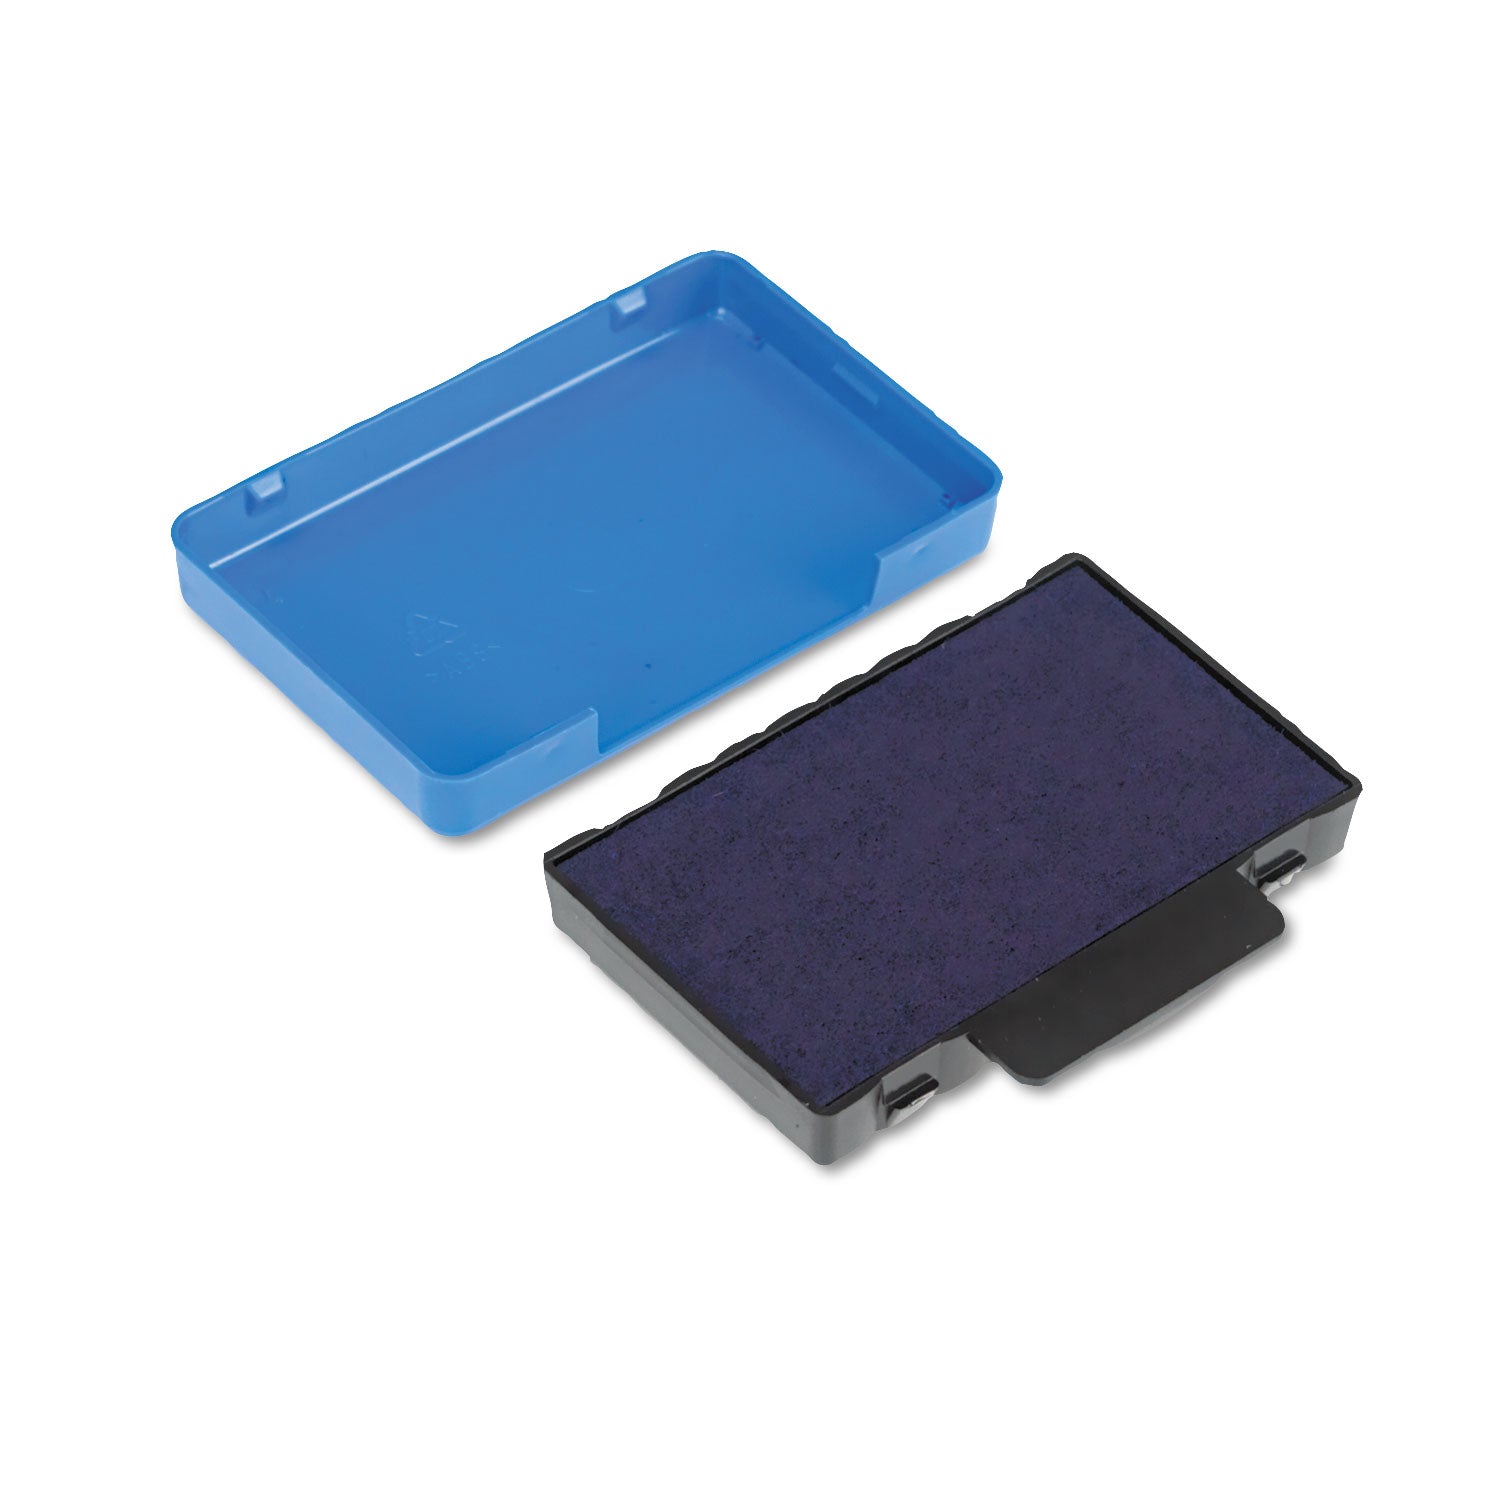 T5440 Professional Replacement Ink Pad for Trodat Custom Self-Inking Stamps, 1.13" x 2", Blue - 